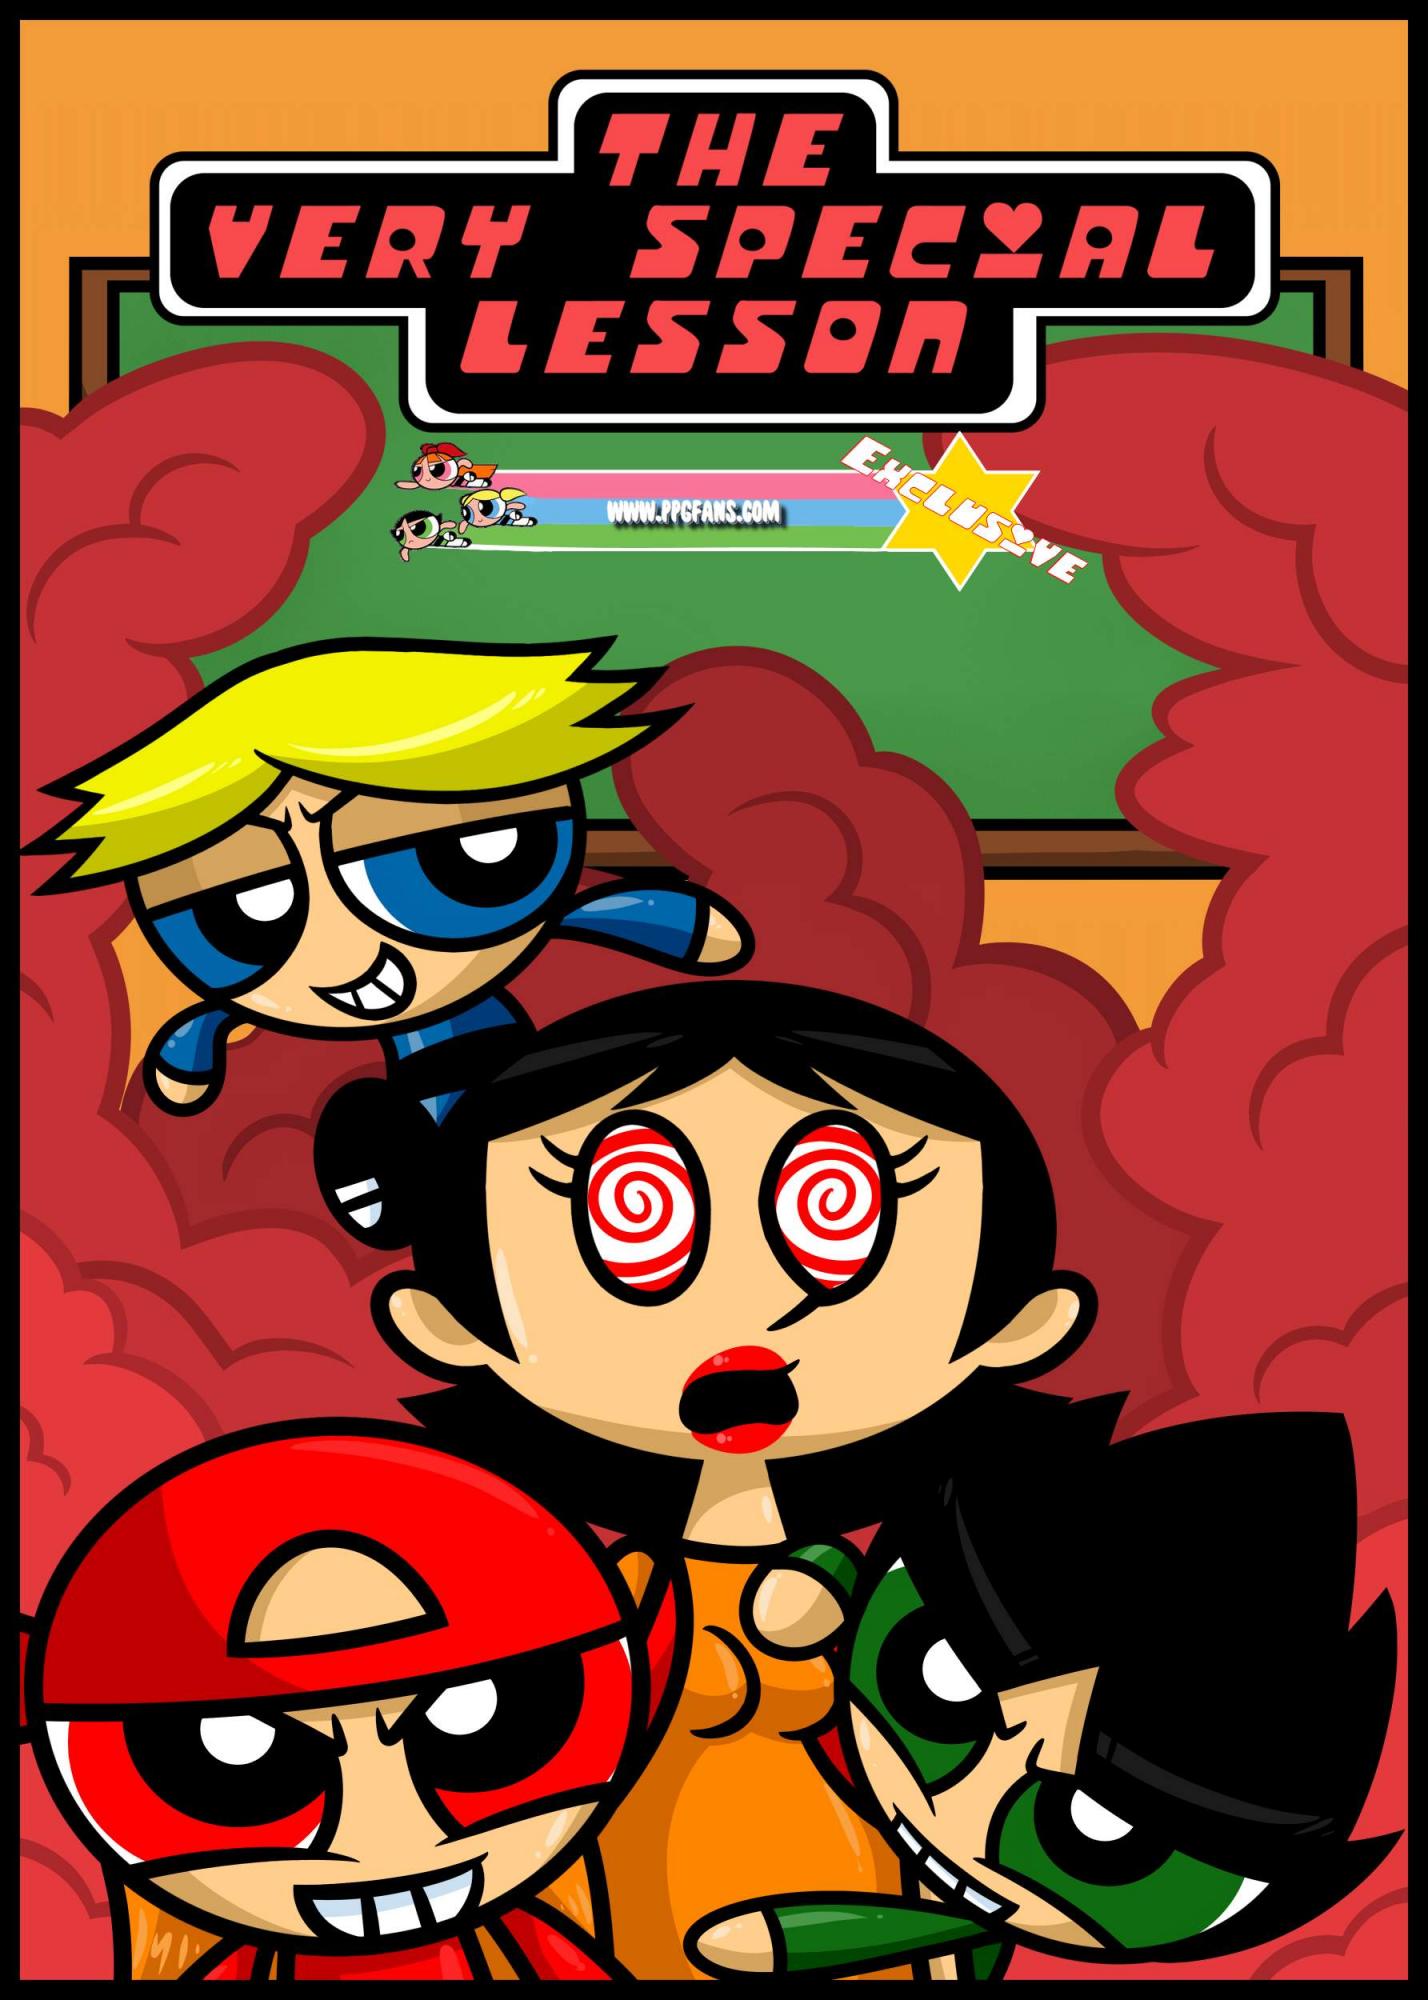 The Powerpuff Girls - The Very Special Lesson by Xierra099